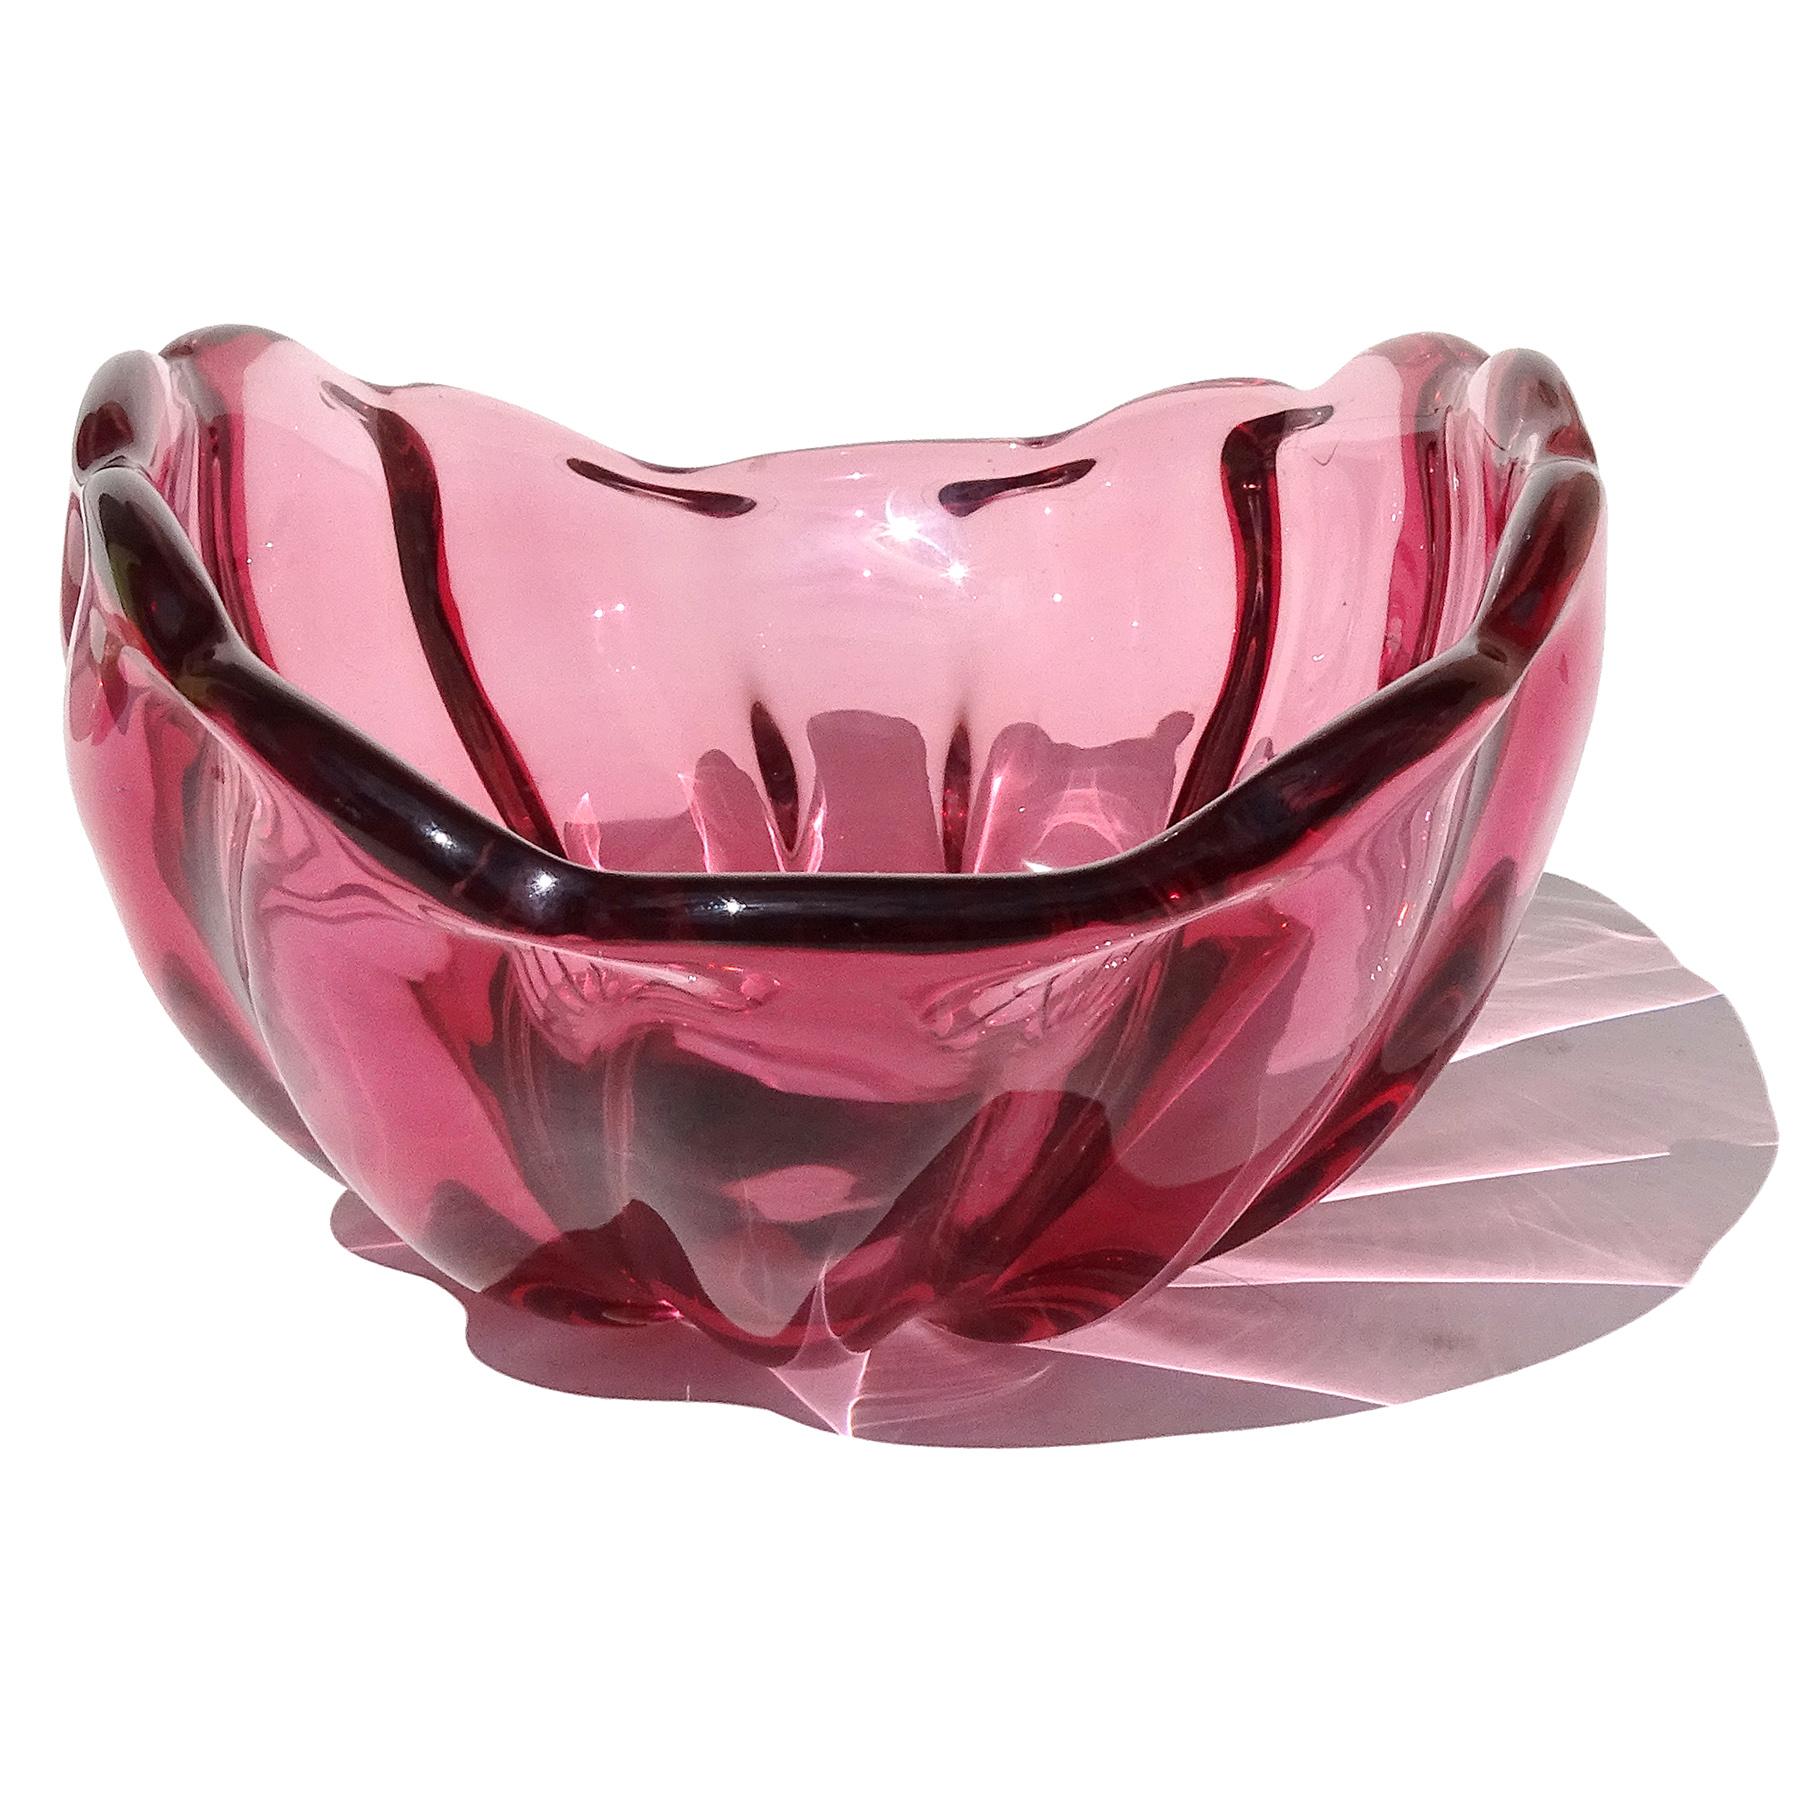 Hand-Crafted Alfredo Barbini Murano Sommerso Pink Italian Art Glass Fruit Bowl Centerpiece For Sale